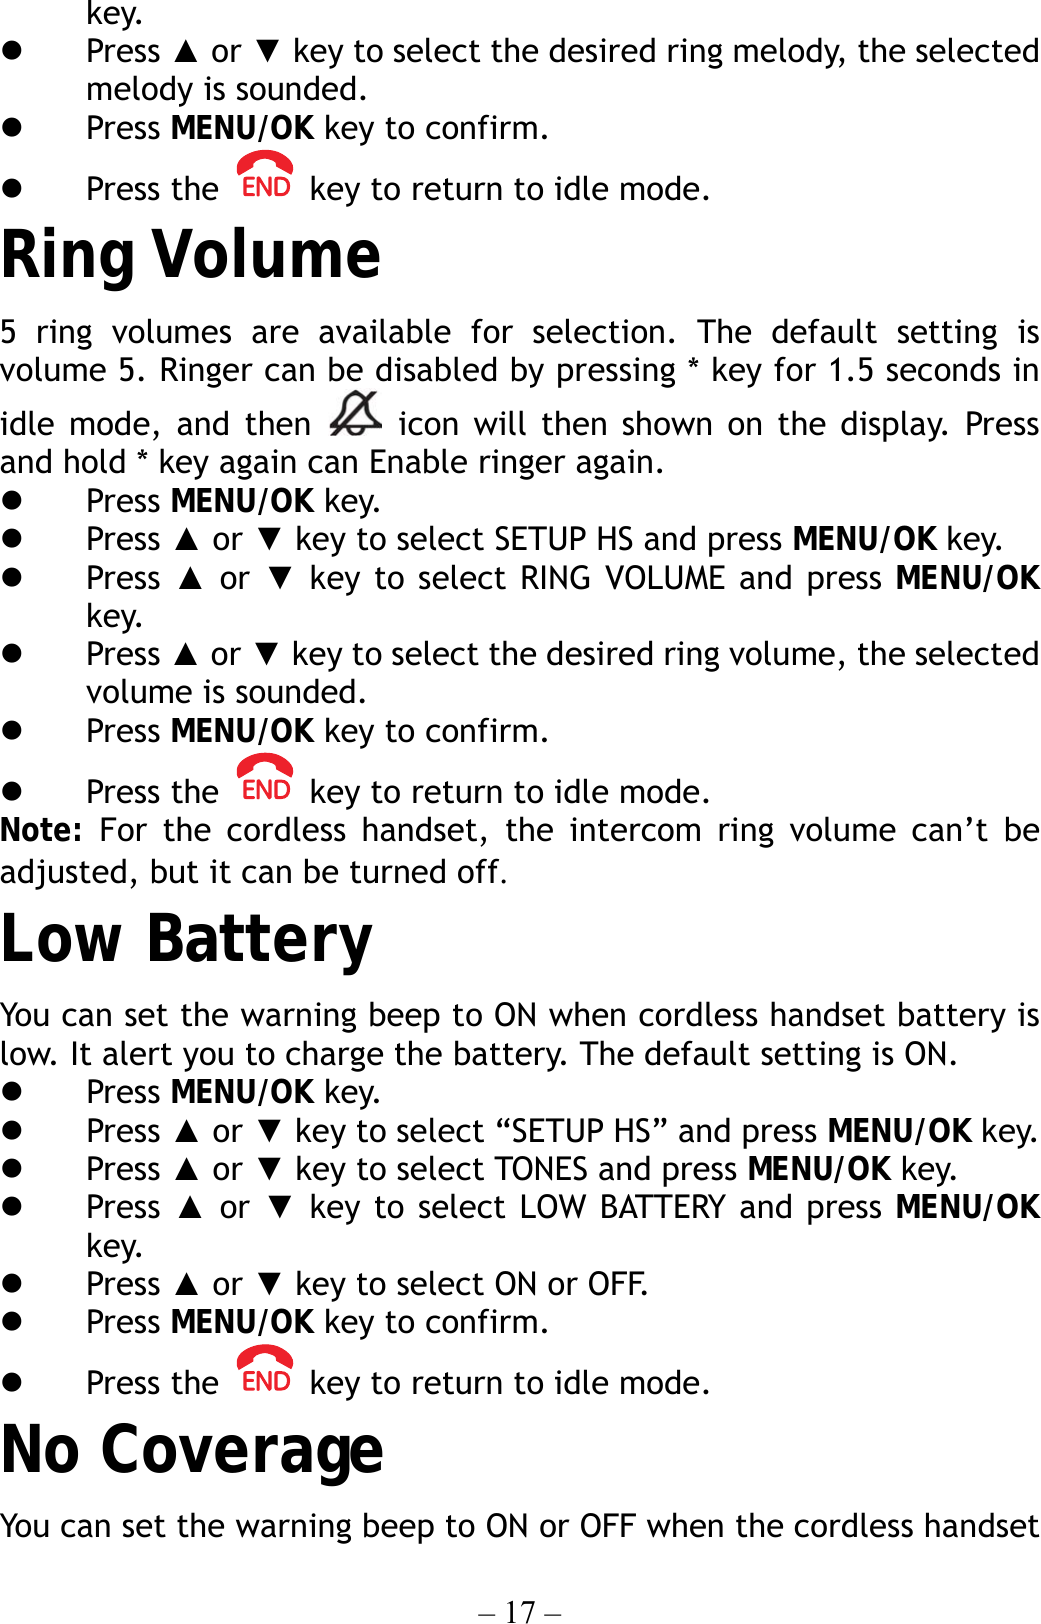 – 17 – key.   Press ▲ or ▼ key to select the desired ring melody, the selected melody is sounded.   Press MENU/OK key to confirm.   Press the    key to return to idle mode. Ring Volume 5 ring volumes are available for selection. The default setting is volume 5. Ringer can be disabled by pressing * key for 1.5 seconds in idle mode, and then   icon will then shown on the display. Press and hold * key again can Enable ringer again.   Press MENU/OK key.   Press ▲ or ▼ key to select SETUP HS and press MENU/OK key.   Press  ▲ or ▼ key to select RING VOLUME and press MENU/OK key.   Press ▲ or ▼ key to select the desired ring volume, the selected volume is sounded.   Press MENU/OK key to confirm.   Press the    key to return to idle mode. Note: For the cordless handset, the intercom ring volume can’t be adjusted, but it can be turned off. Low Battery You can set the warning beep to ON when cordless handset battery is low. It alert you to charge the battery. The default setting is ON.   Press MENU/OK key.   Press ▲ or ▼ key to select “SETUP HS” and press MENU/OK key.   Press ▲ or ▼ key to select TONES and press MENU/OK key.   Press  ▲ or ▼ key to select LOW BATTERY and press MENU/OK key.   Press ▲ or ▼ key to select ON or OFF.   Press MENU/OK key to confirm.   Press the    key to return to idle mode. No Coverage You can set the warning beep to ON or OFF when the cordless handset 